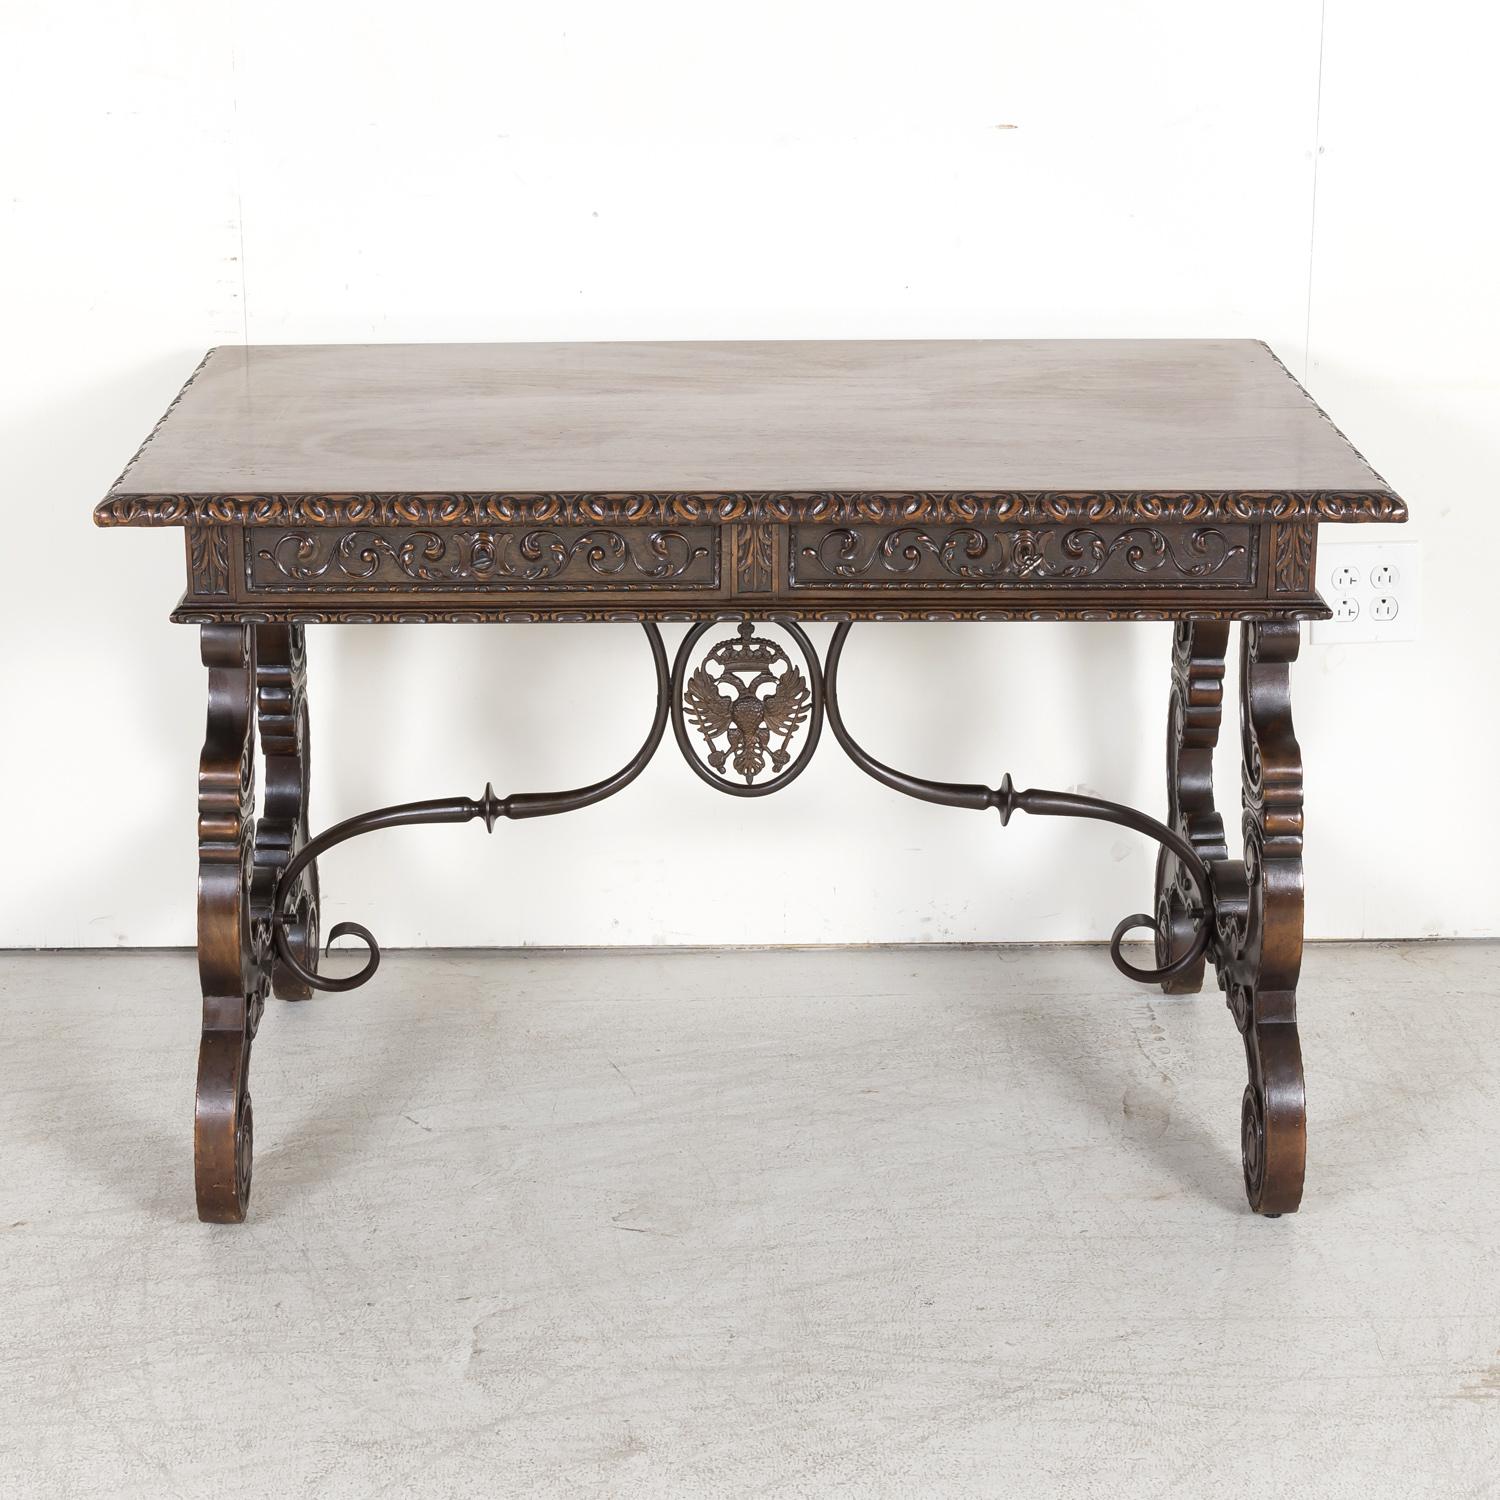 A finely carved Baroque style writing table or side table handcrafted of walnut by talented artisans in the Catalan region of Spain, circa 1880s. Having a single plank rectangular top with a beveled gadroon edge above an intricately carved frieze